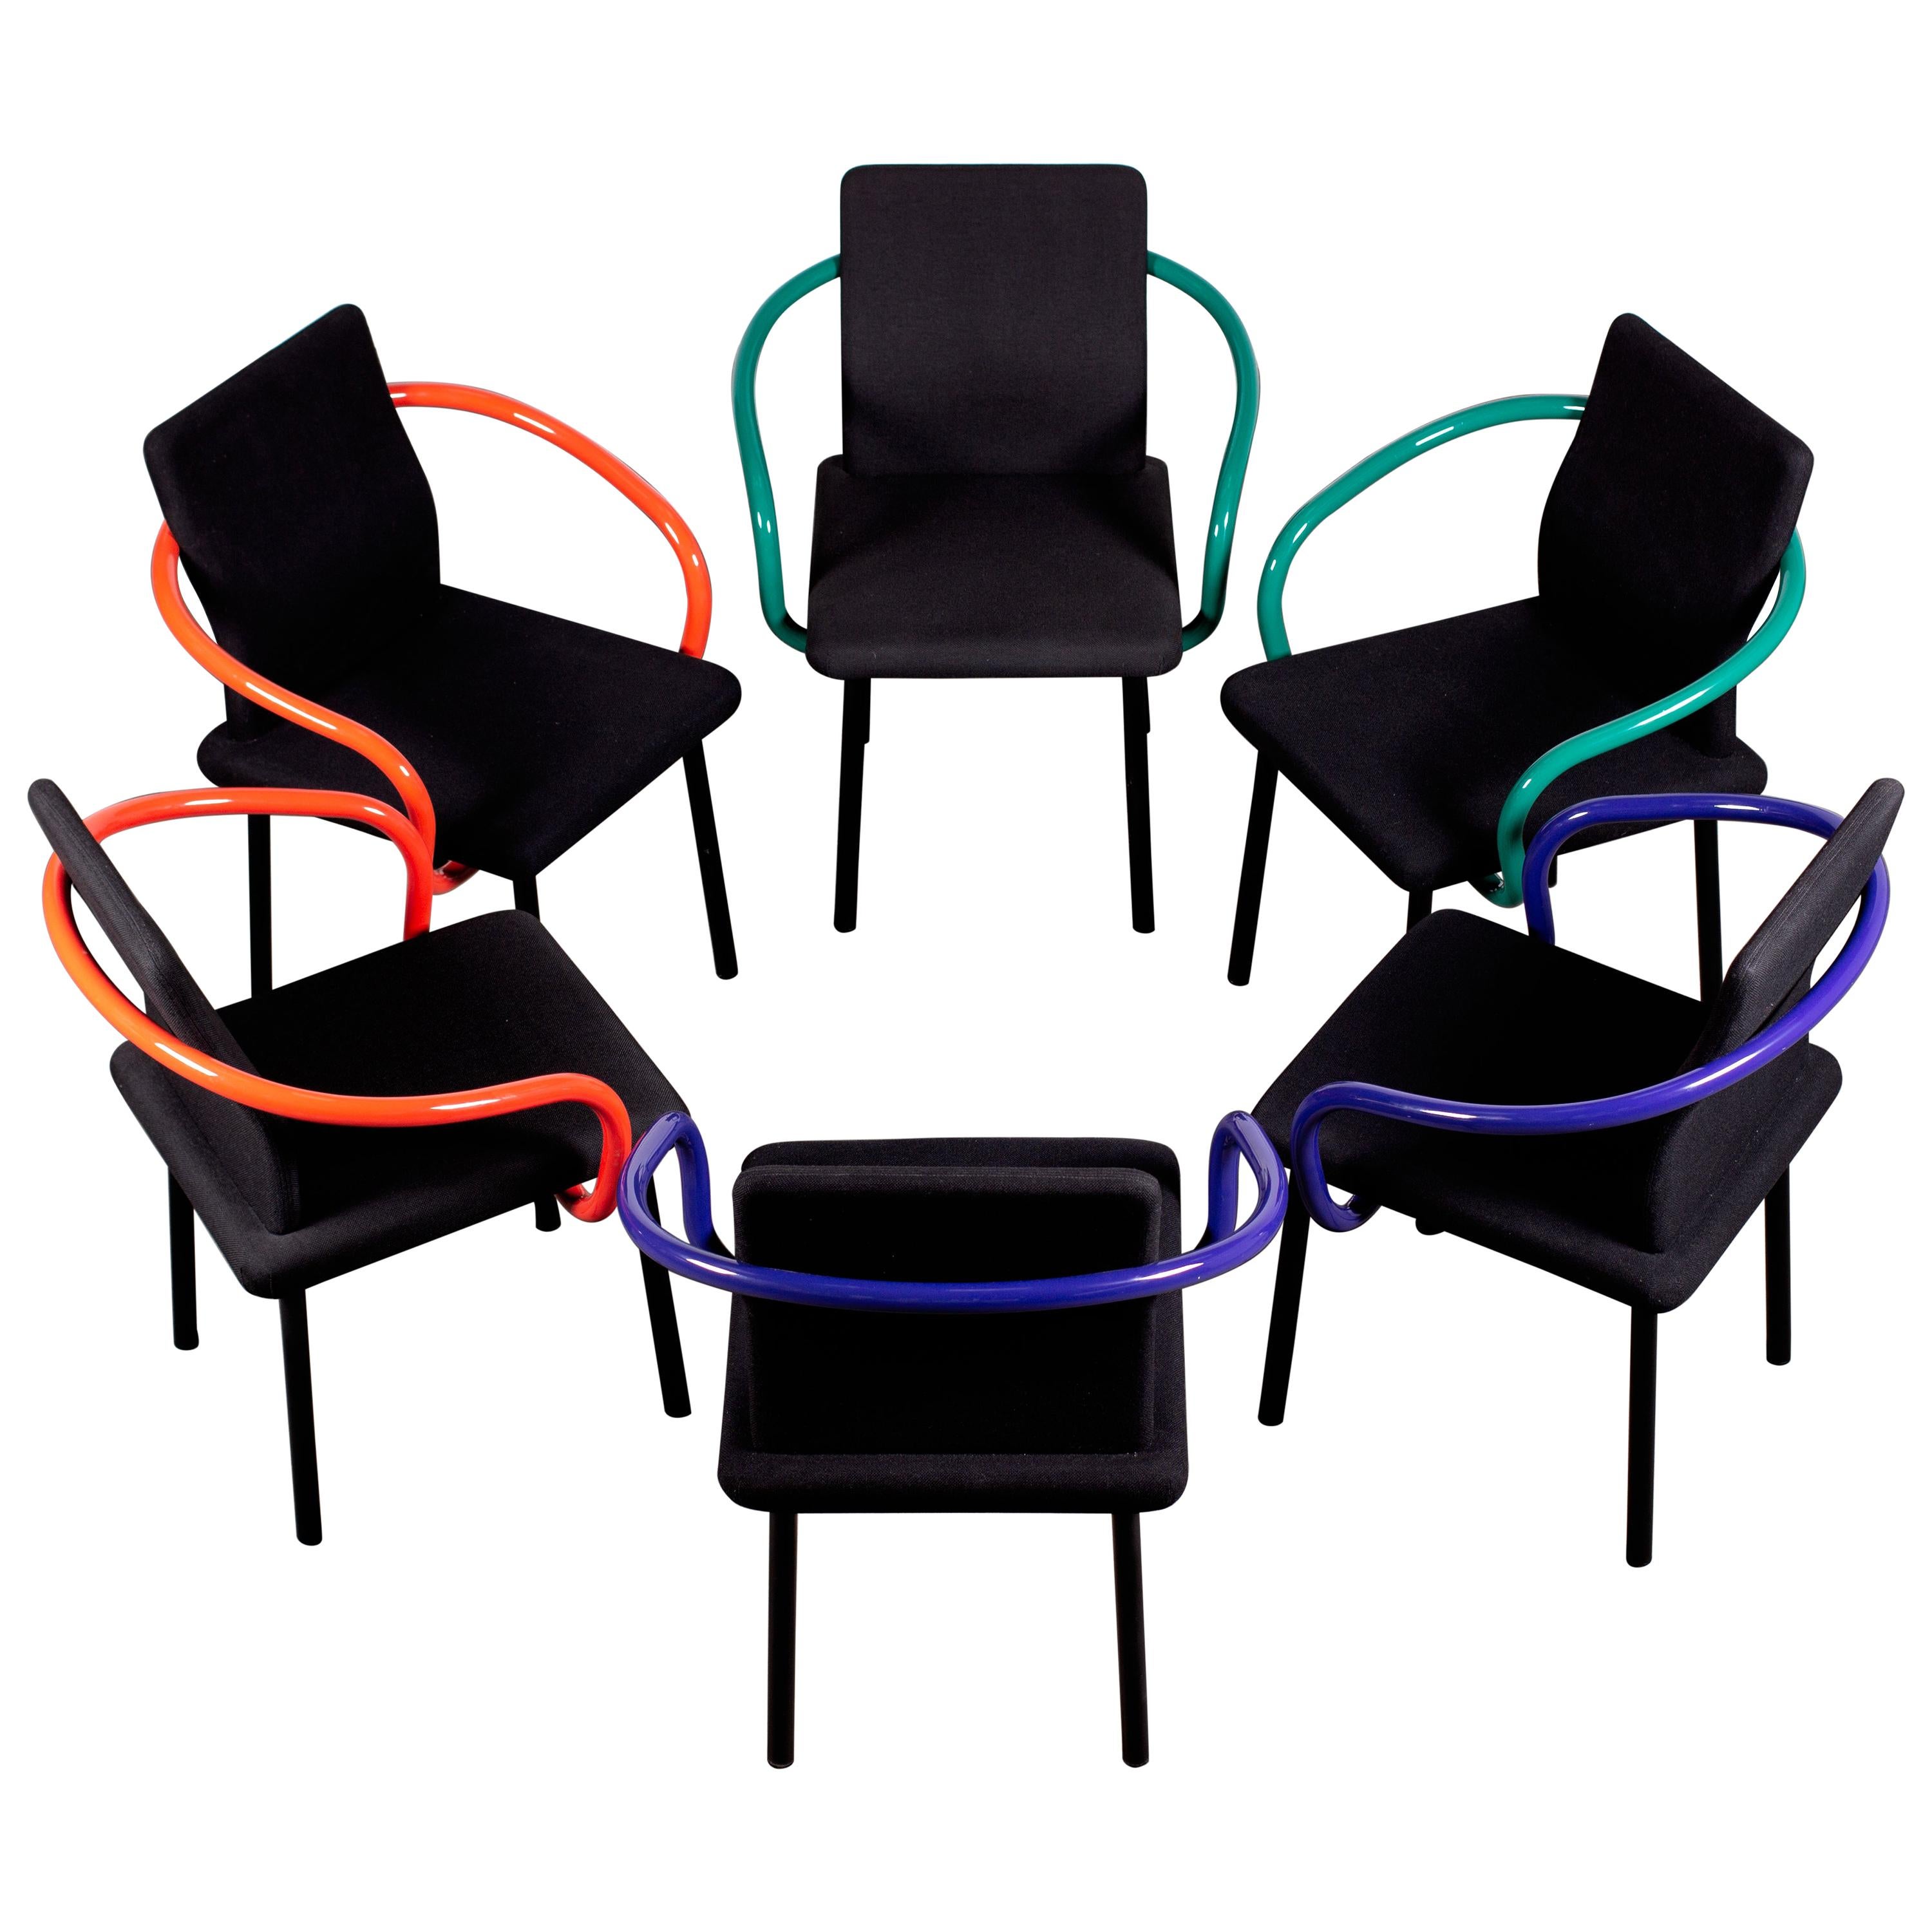 Steel Pair of Ettore Sottsass Mandarin Chairs for Knoll in Violet & Black